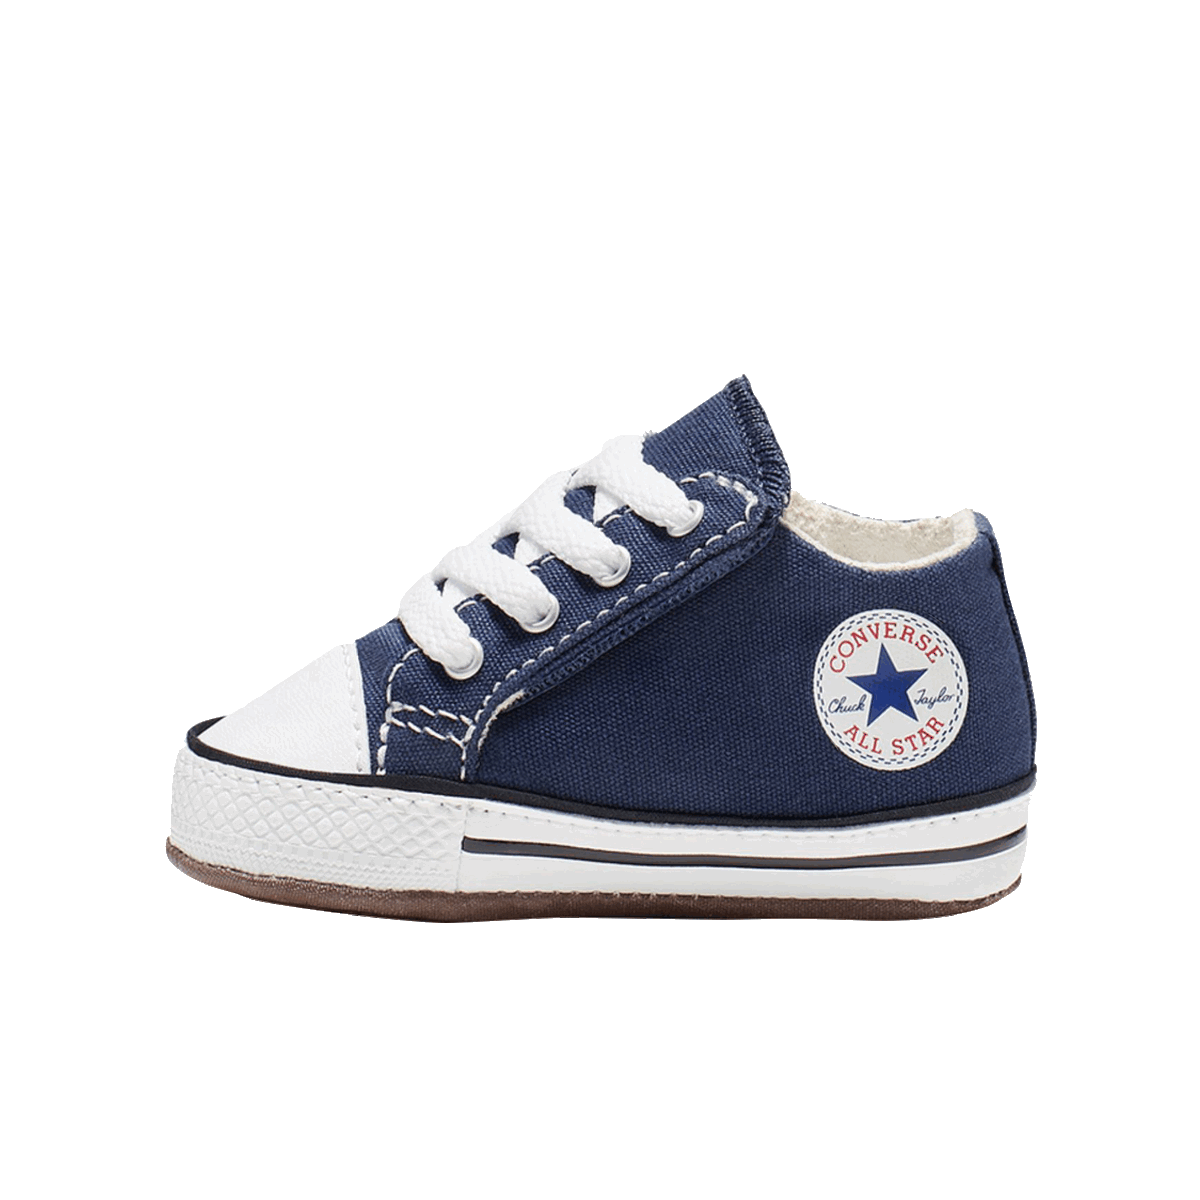 CHUCK TAYLOR ALL STAR CRIBSTER All